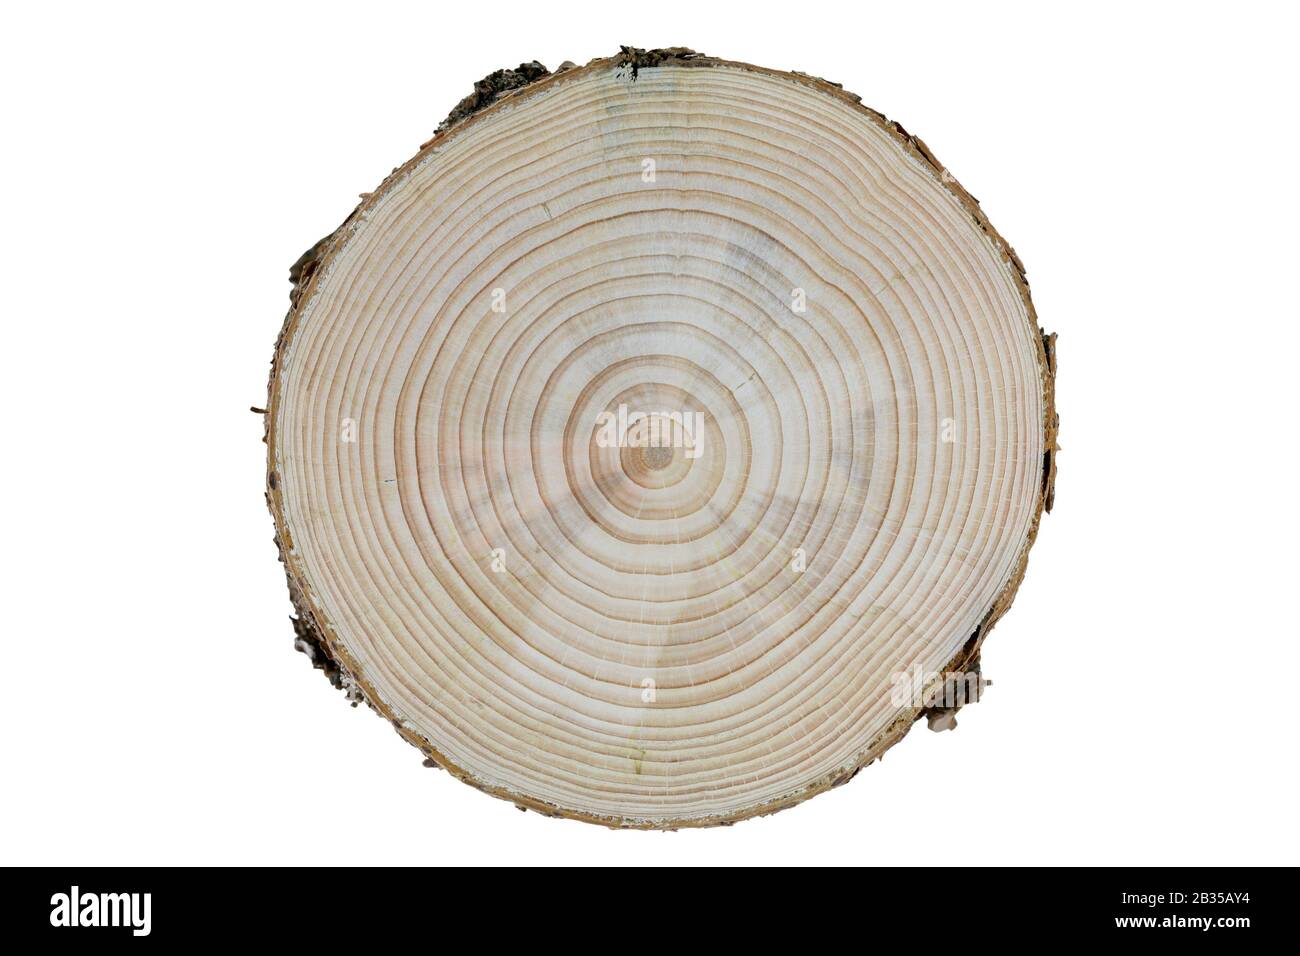 Growth Rings: cross-section of a pine tree trunk with differentiated growth rings Stock Photo